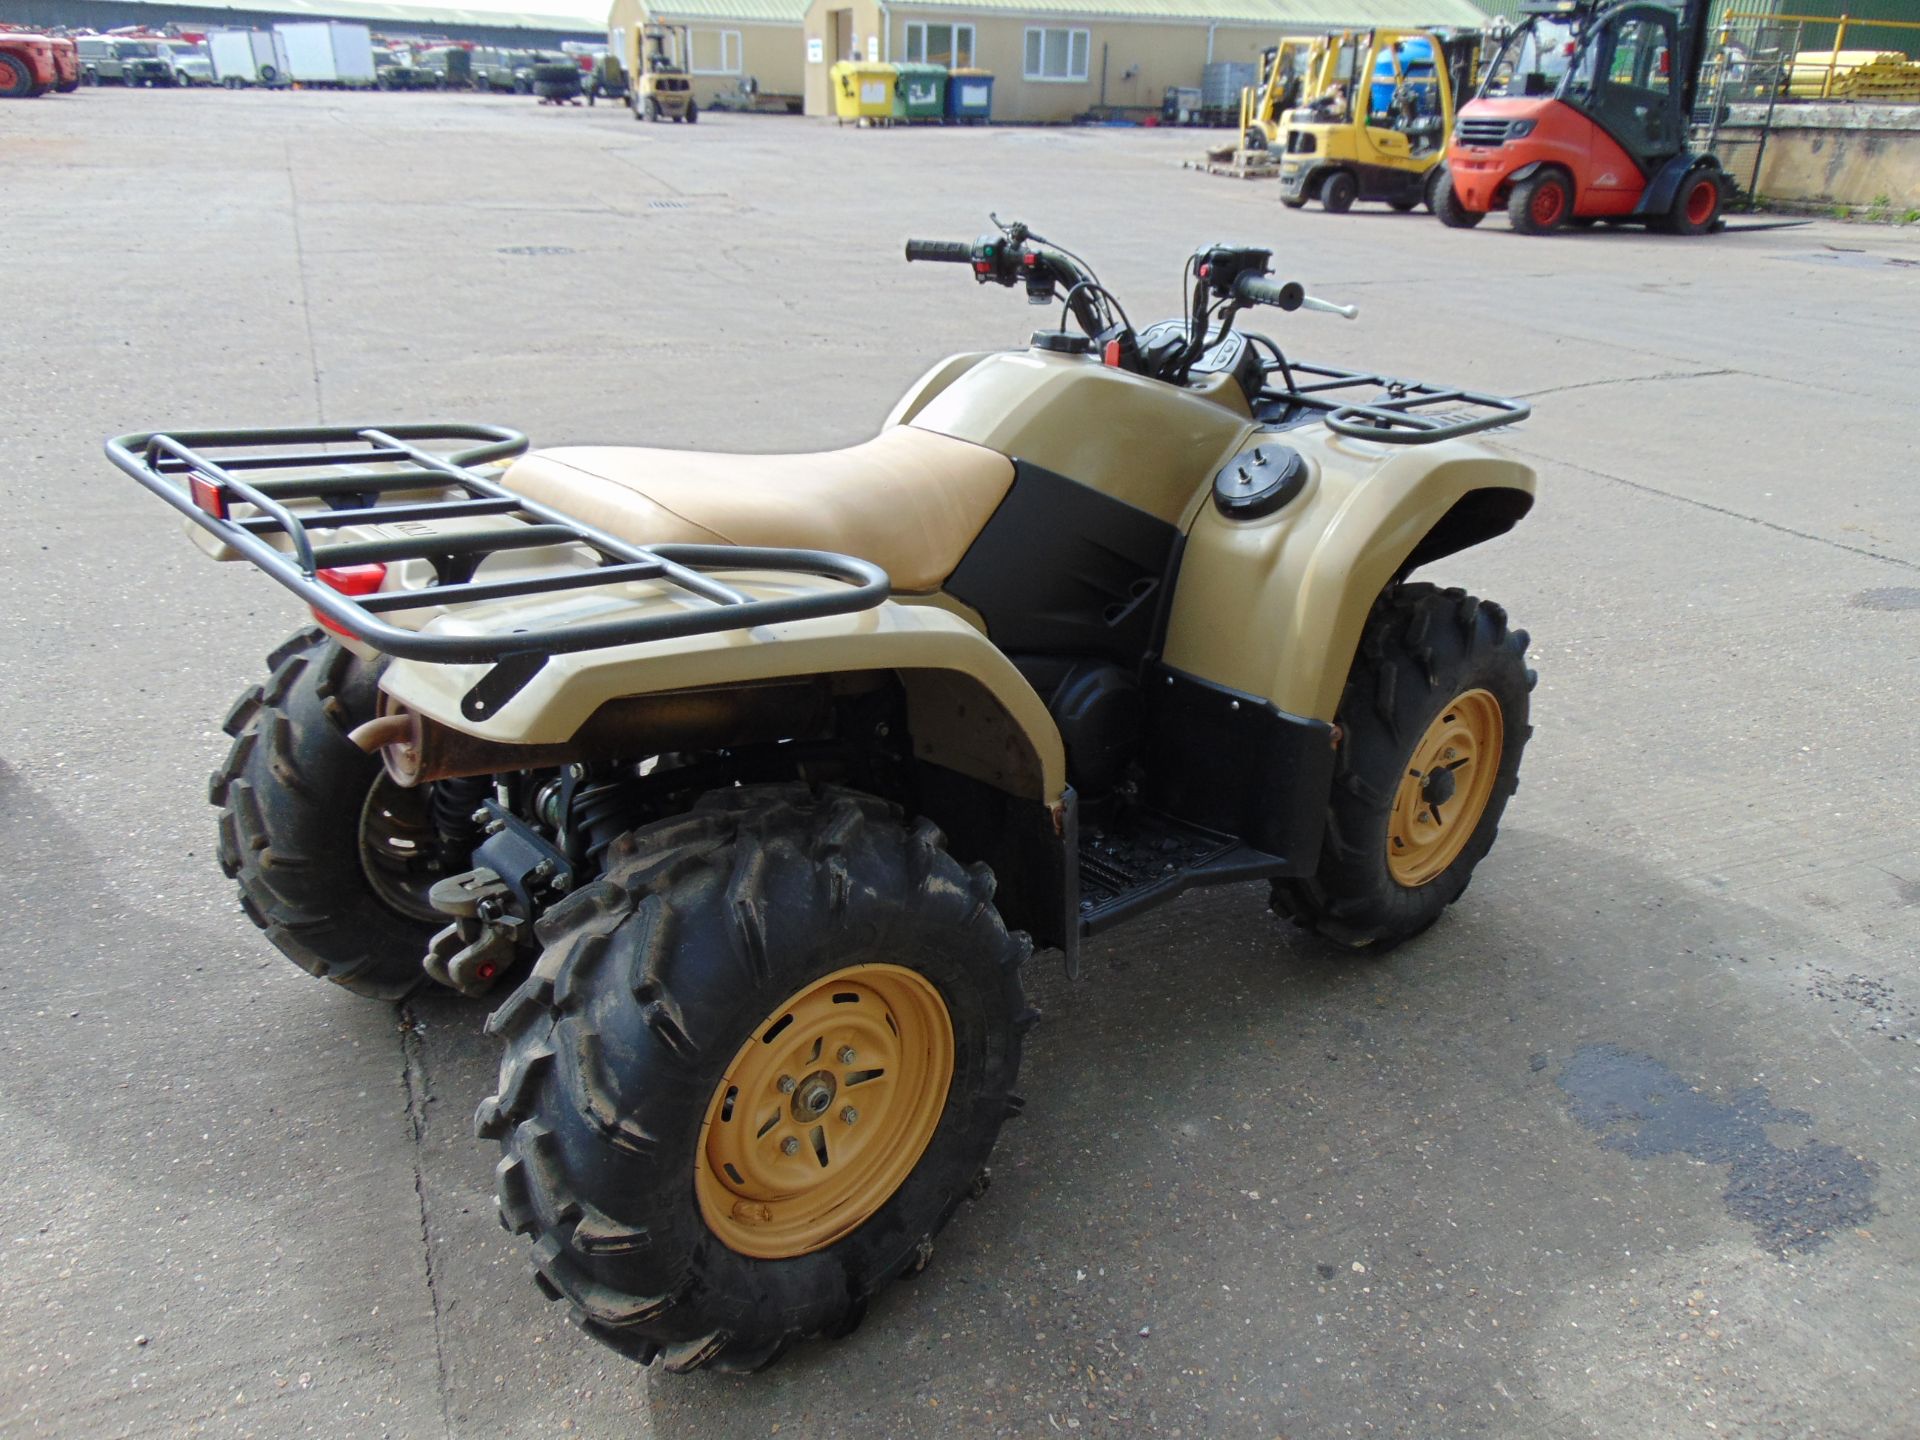 Yamaha Grizzly 450 4 x 4 ATV Quad Bike 584 hours only from MOD - Image 11 of 30